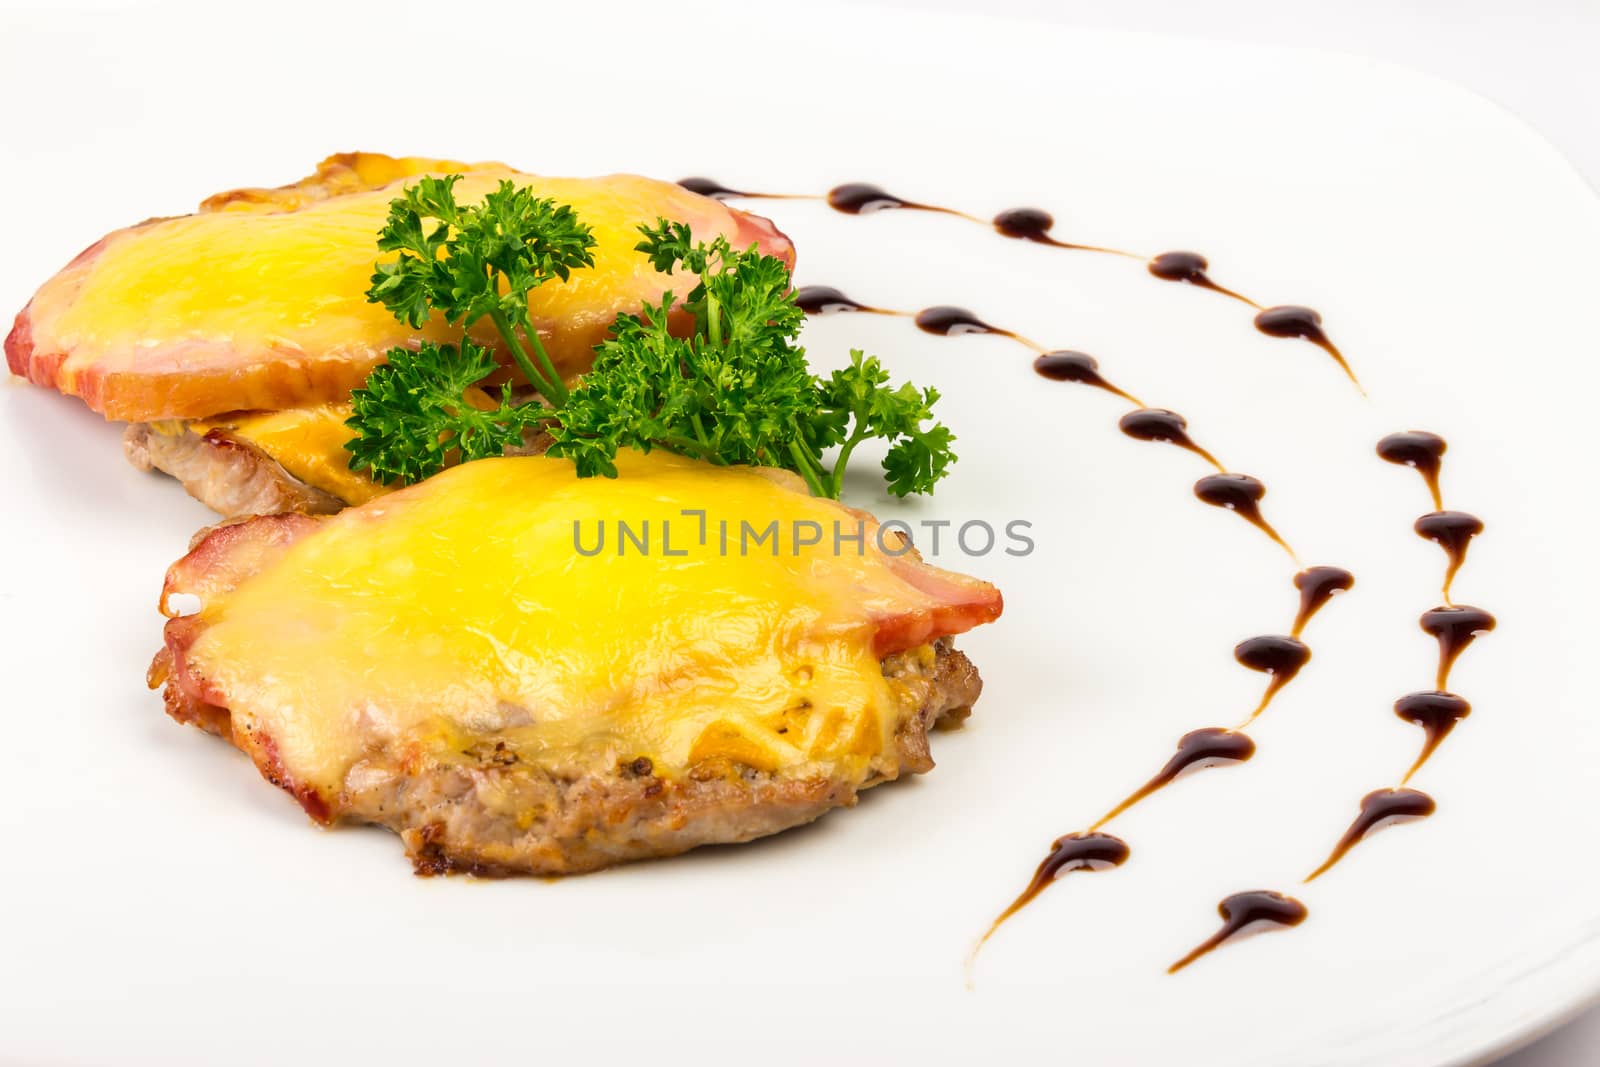 Meat patty with bacon and melted cheese by Pellinni